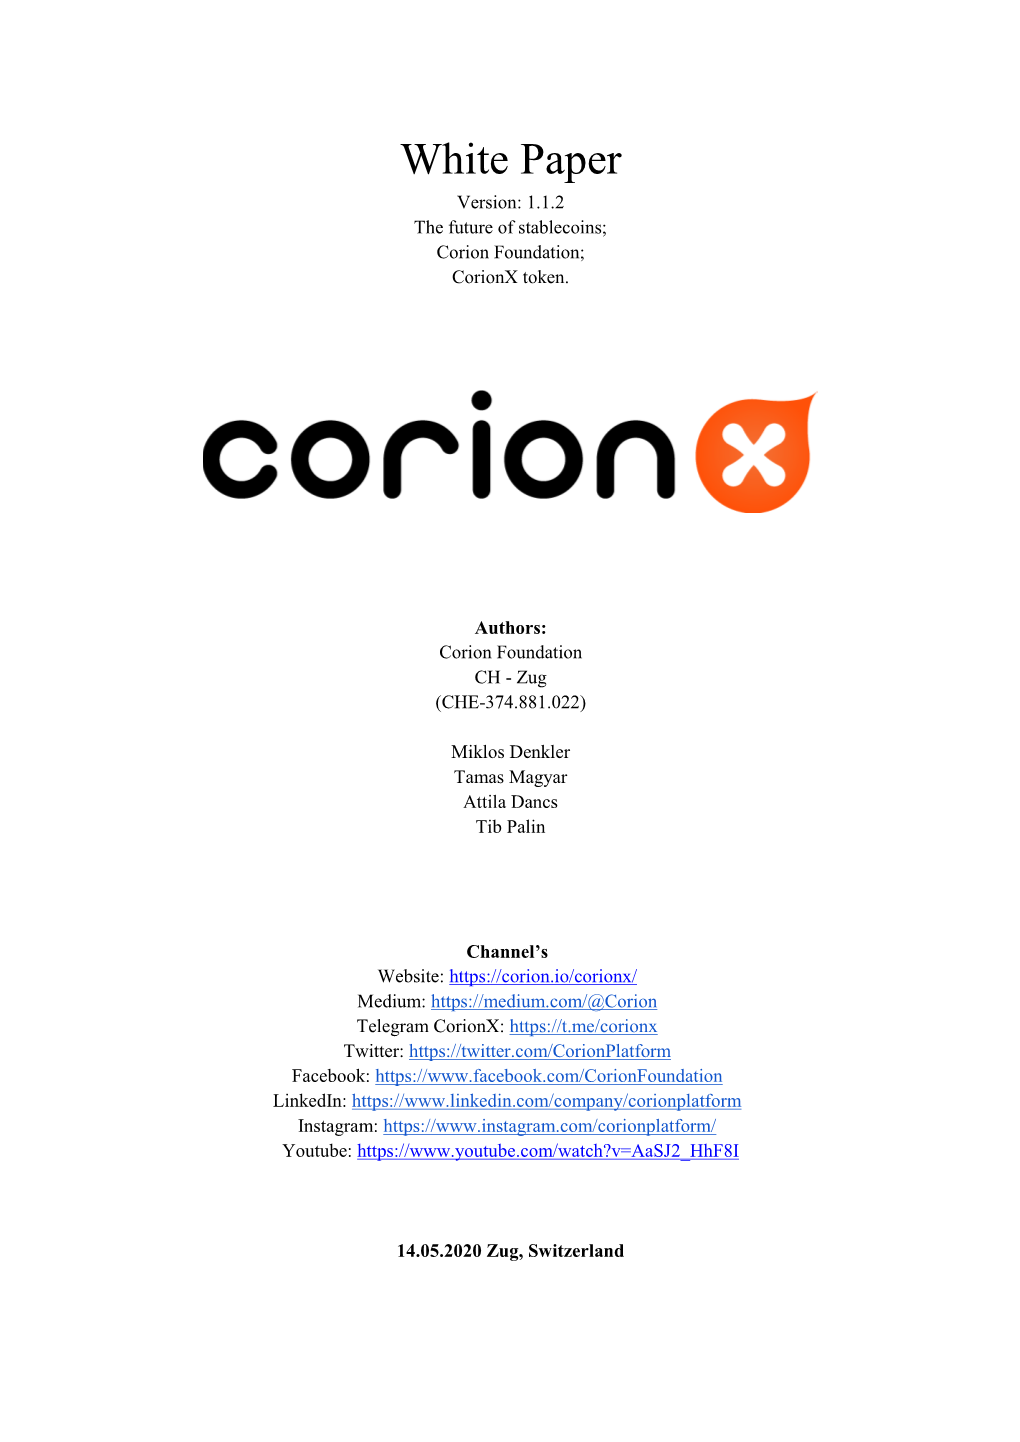 White Paper Version: 1.1.2 the Future of Stablecoins; Corion Foundation; Corionx Token